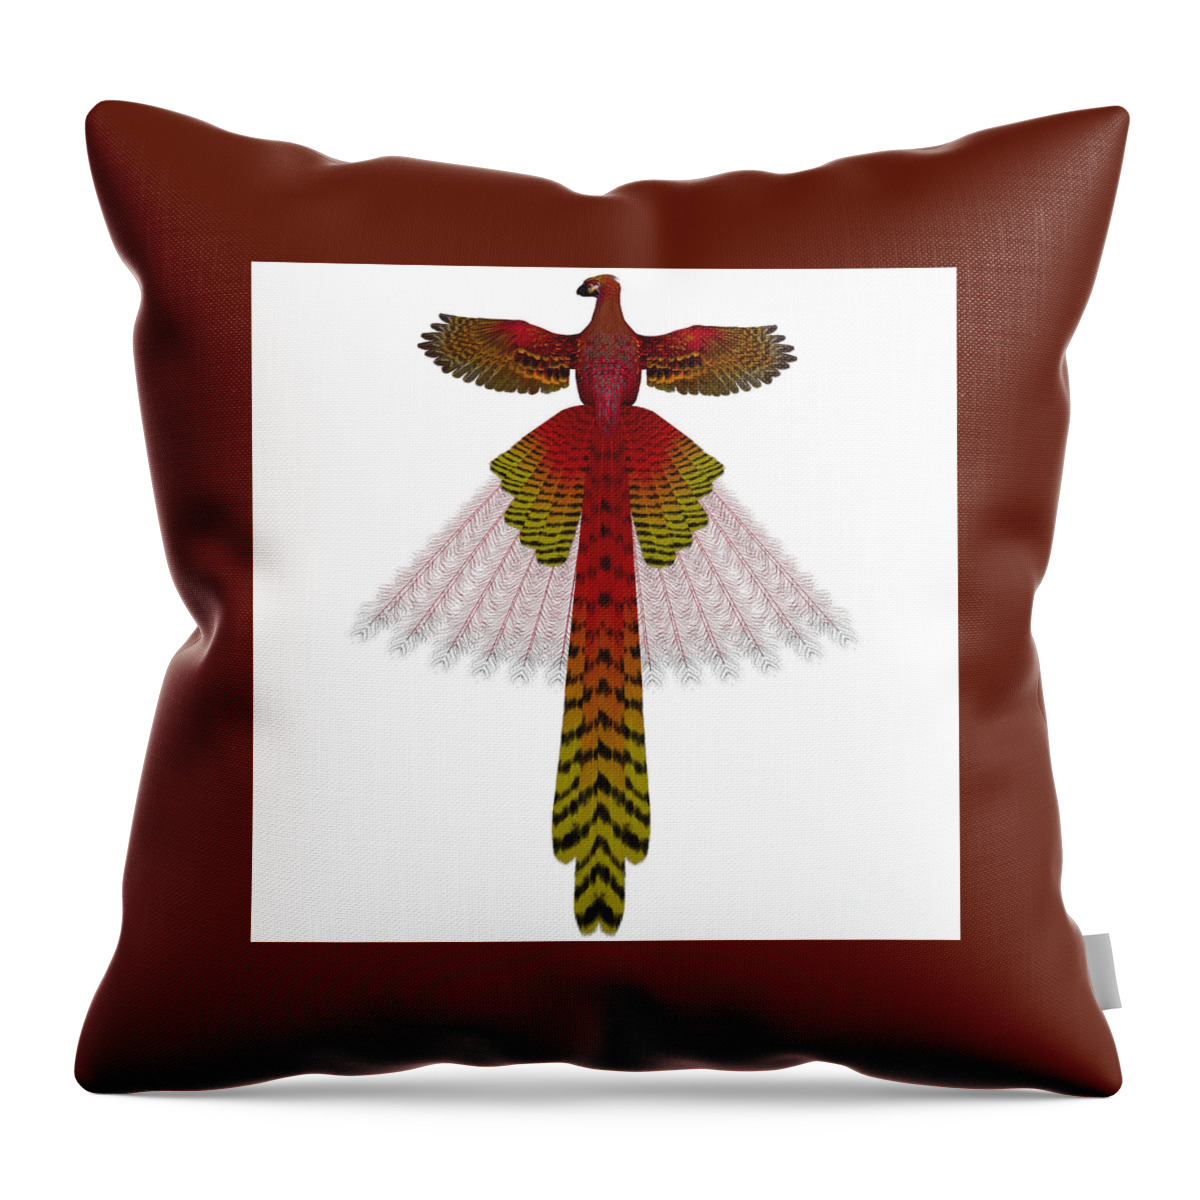 Phoenix Throw Pillow featuring the painting Phoenix Firebird by Corey Ford